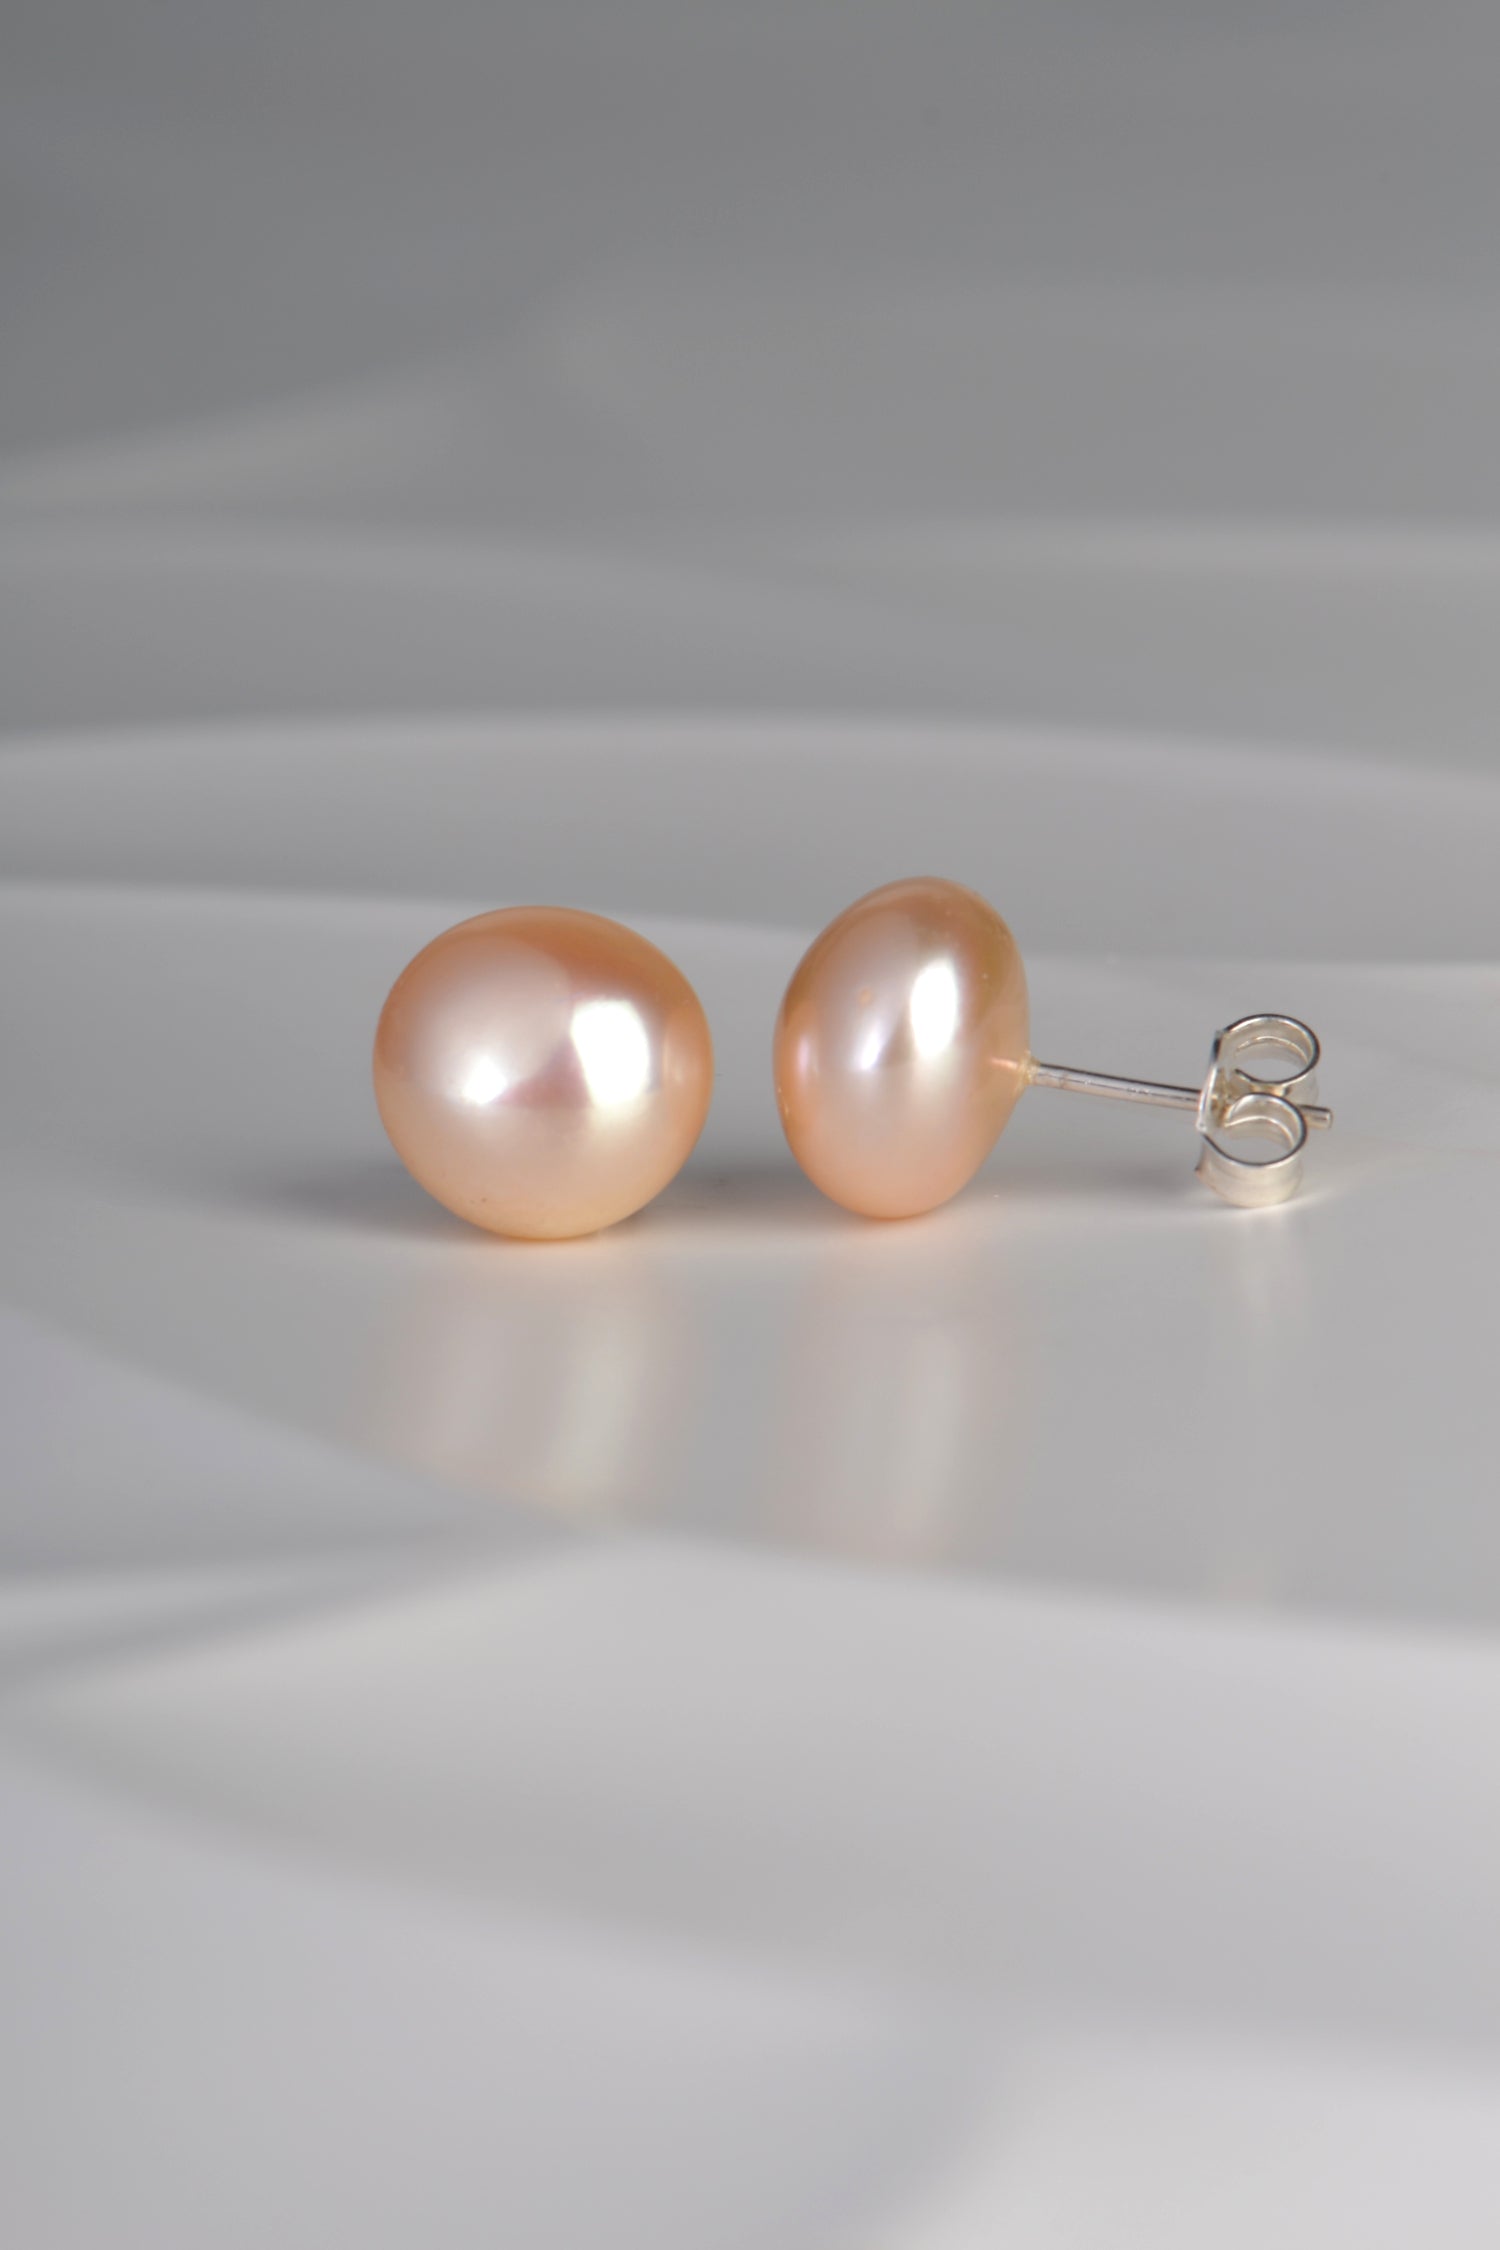 10mm peach pearl earrings photographed side on to show sterling silver posts and butterfly fittings